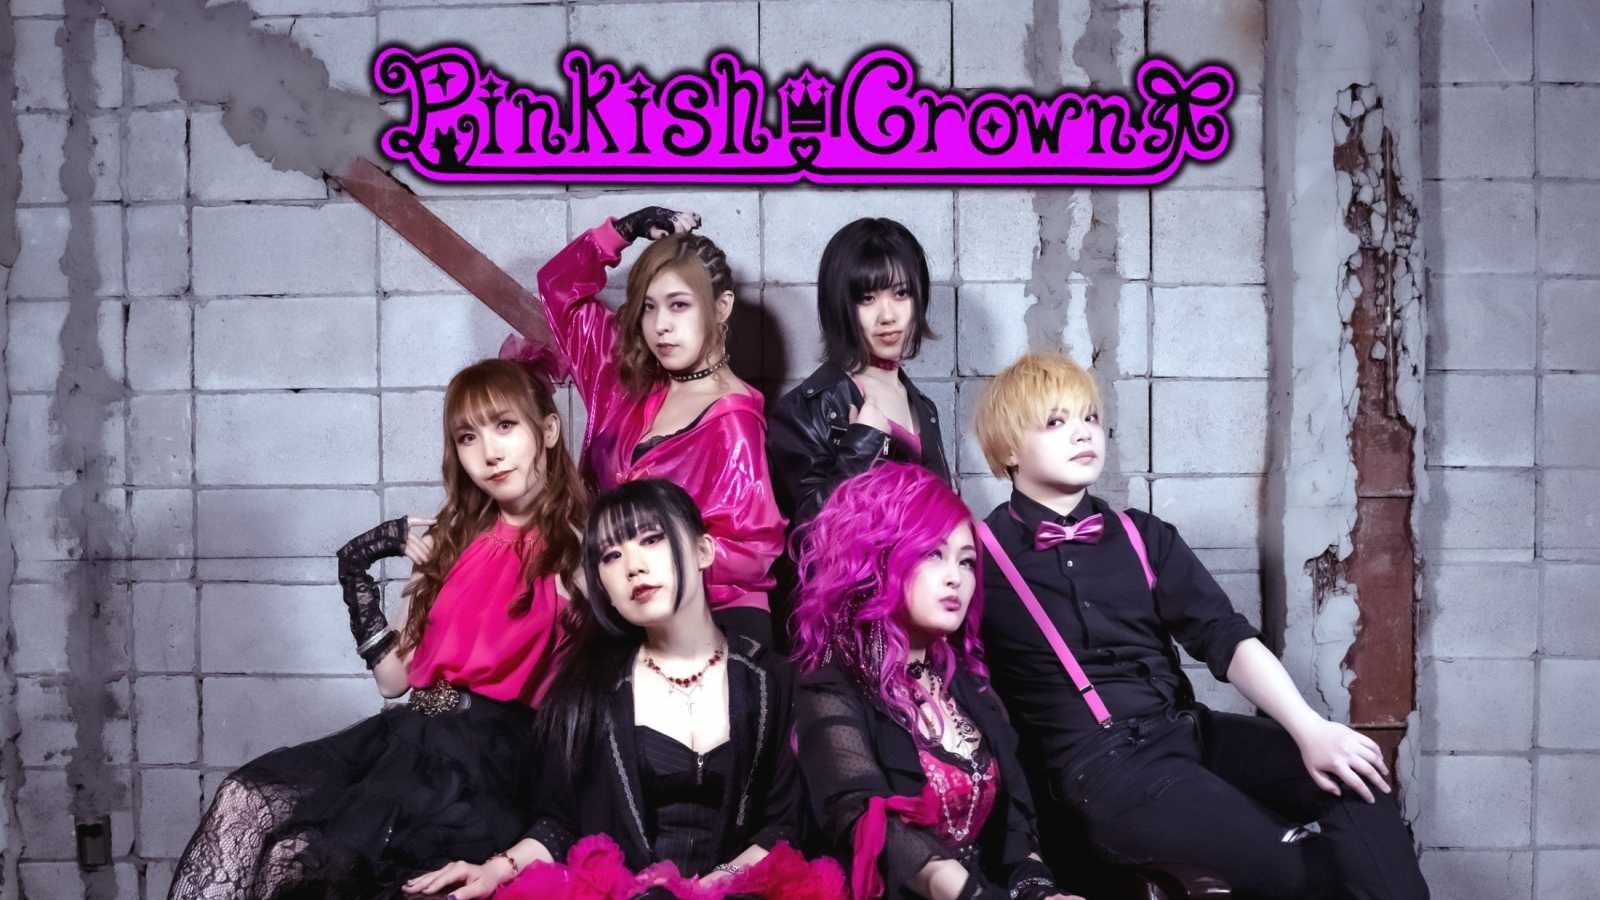 New Album from Pinkish Crown © Pinkish Crown. All Rights Reserved.